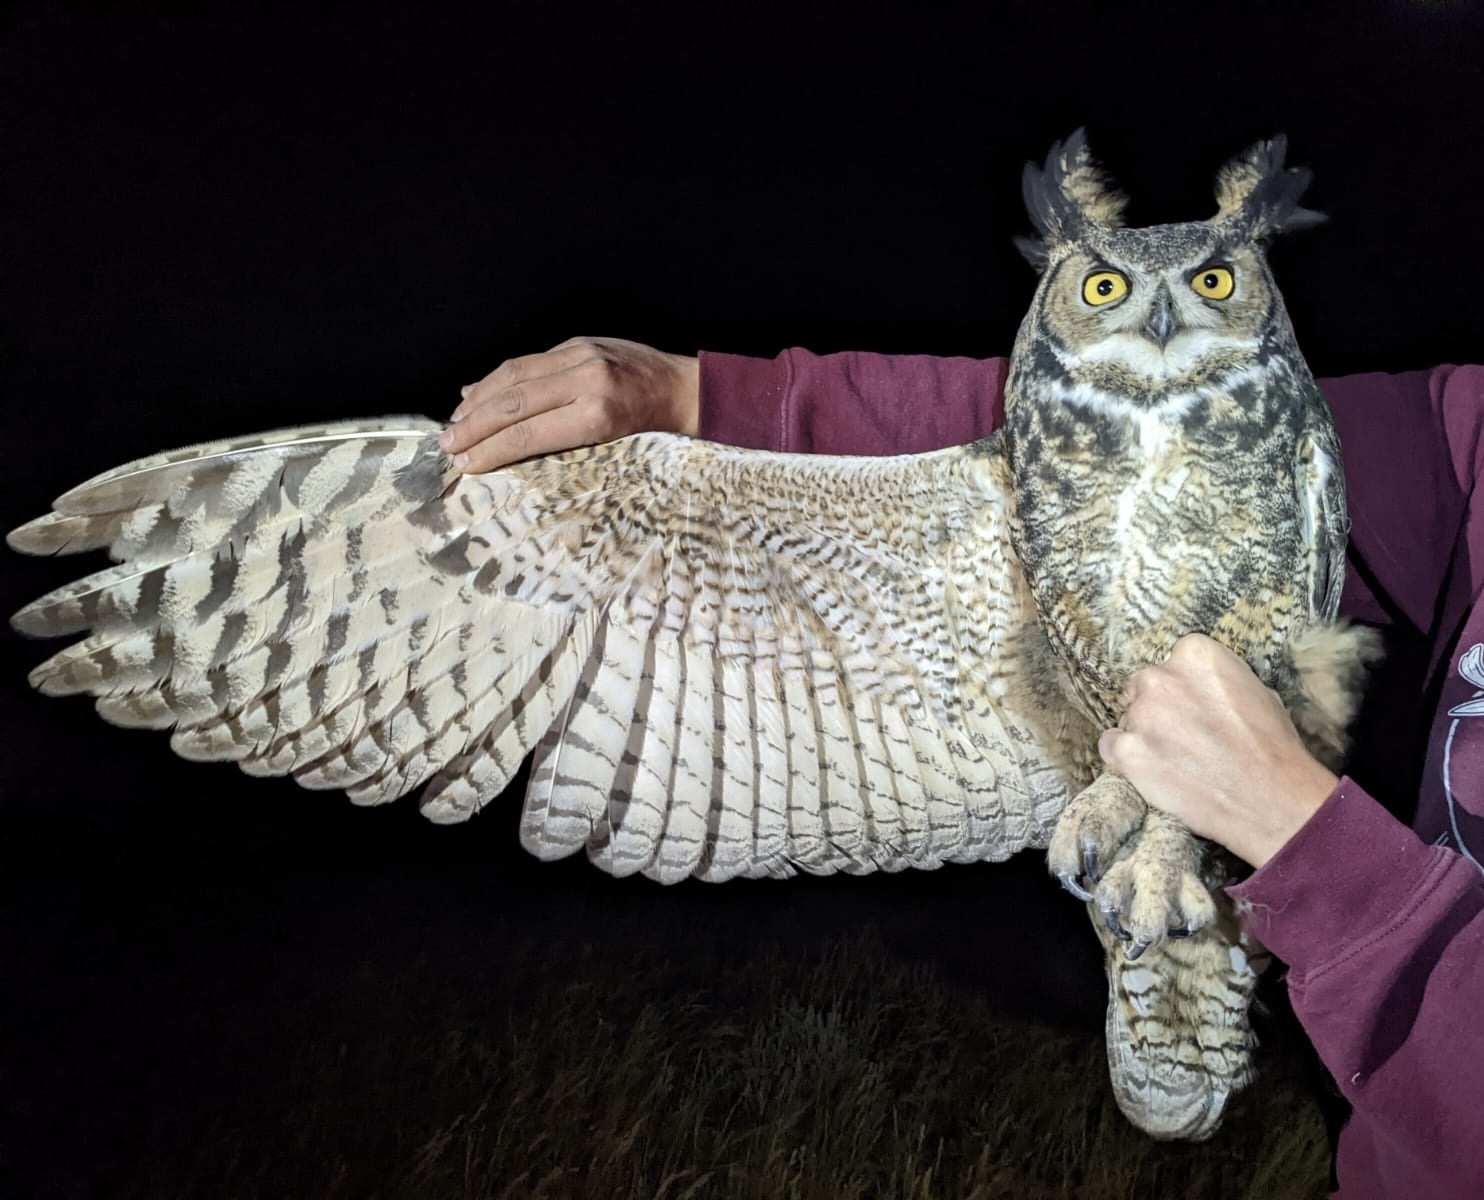 biologist holds owl gently extending it's wing open